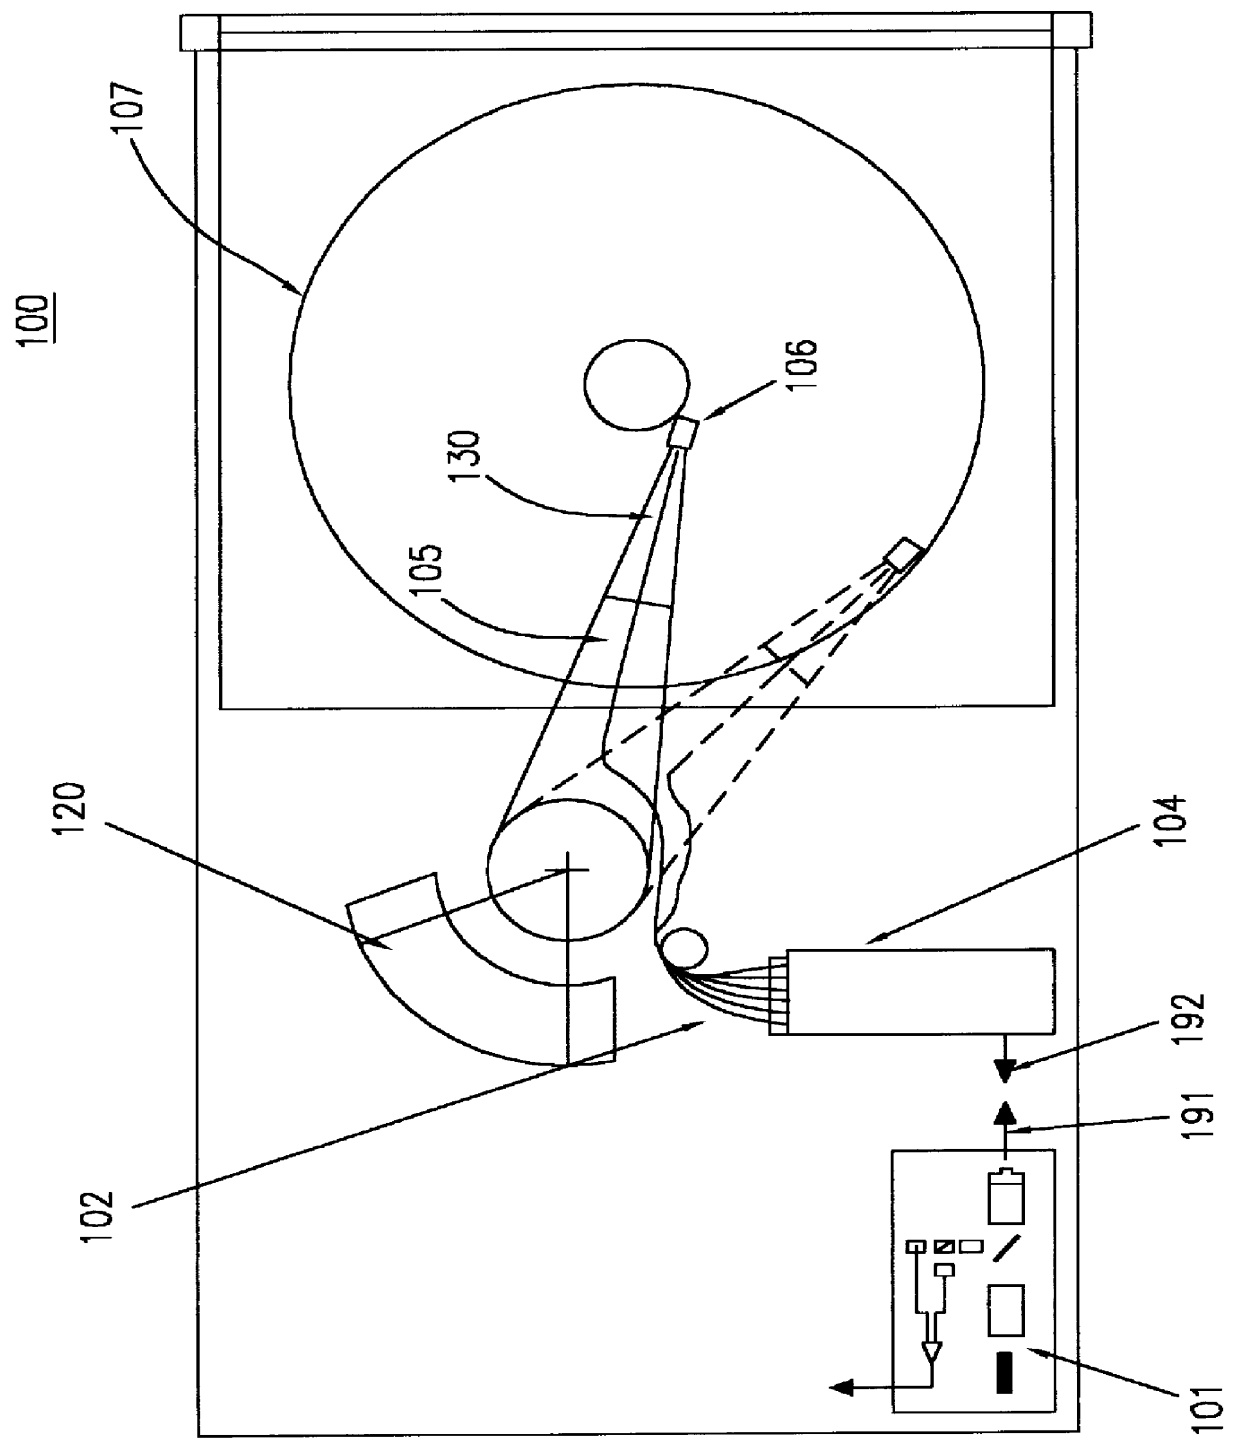 Data storage system having an improved surface micro-machined mirror